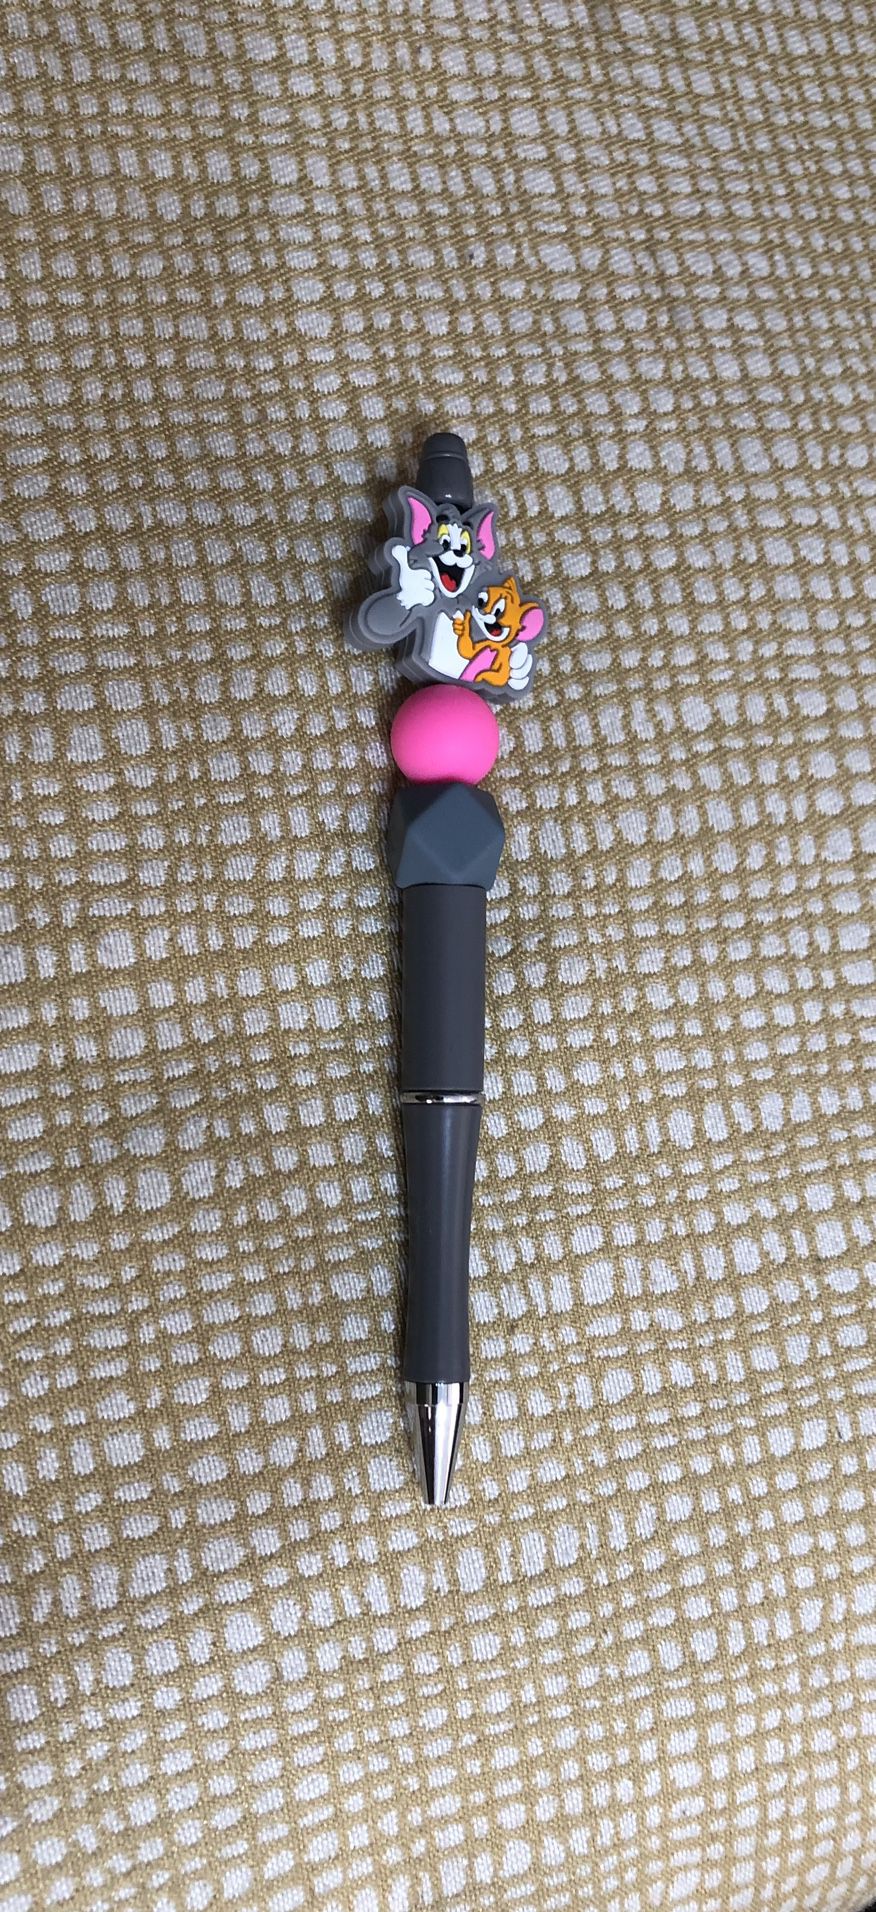 Tom and Jerry  beads pen. Color gray . Size 6”LX 1” W